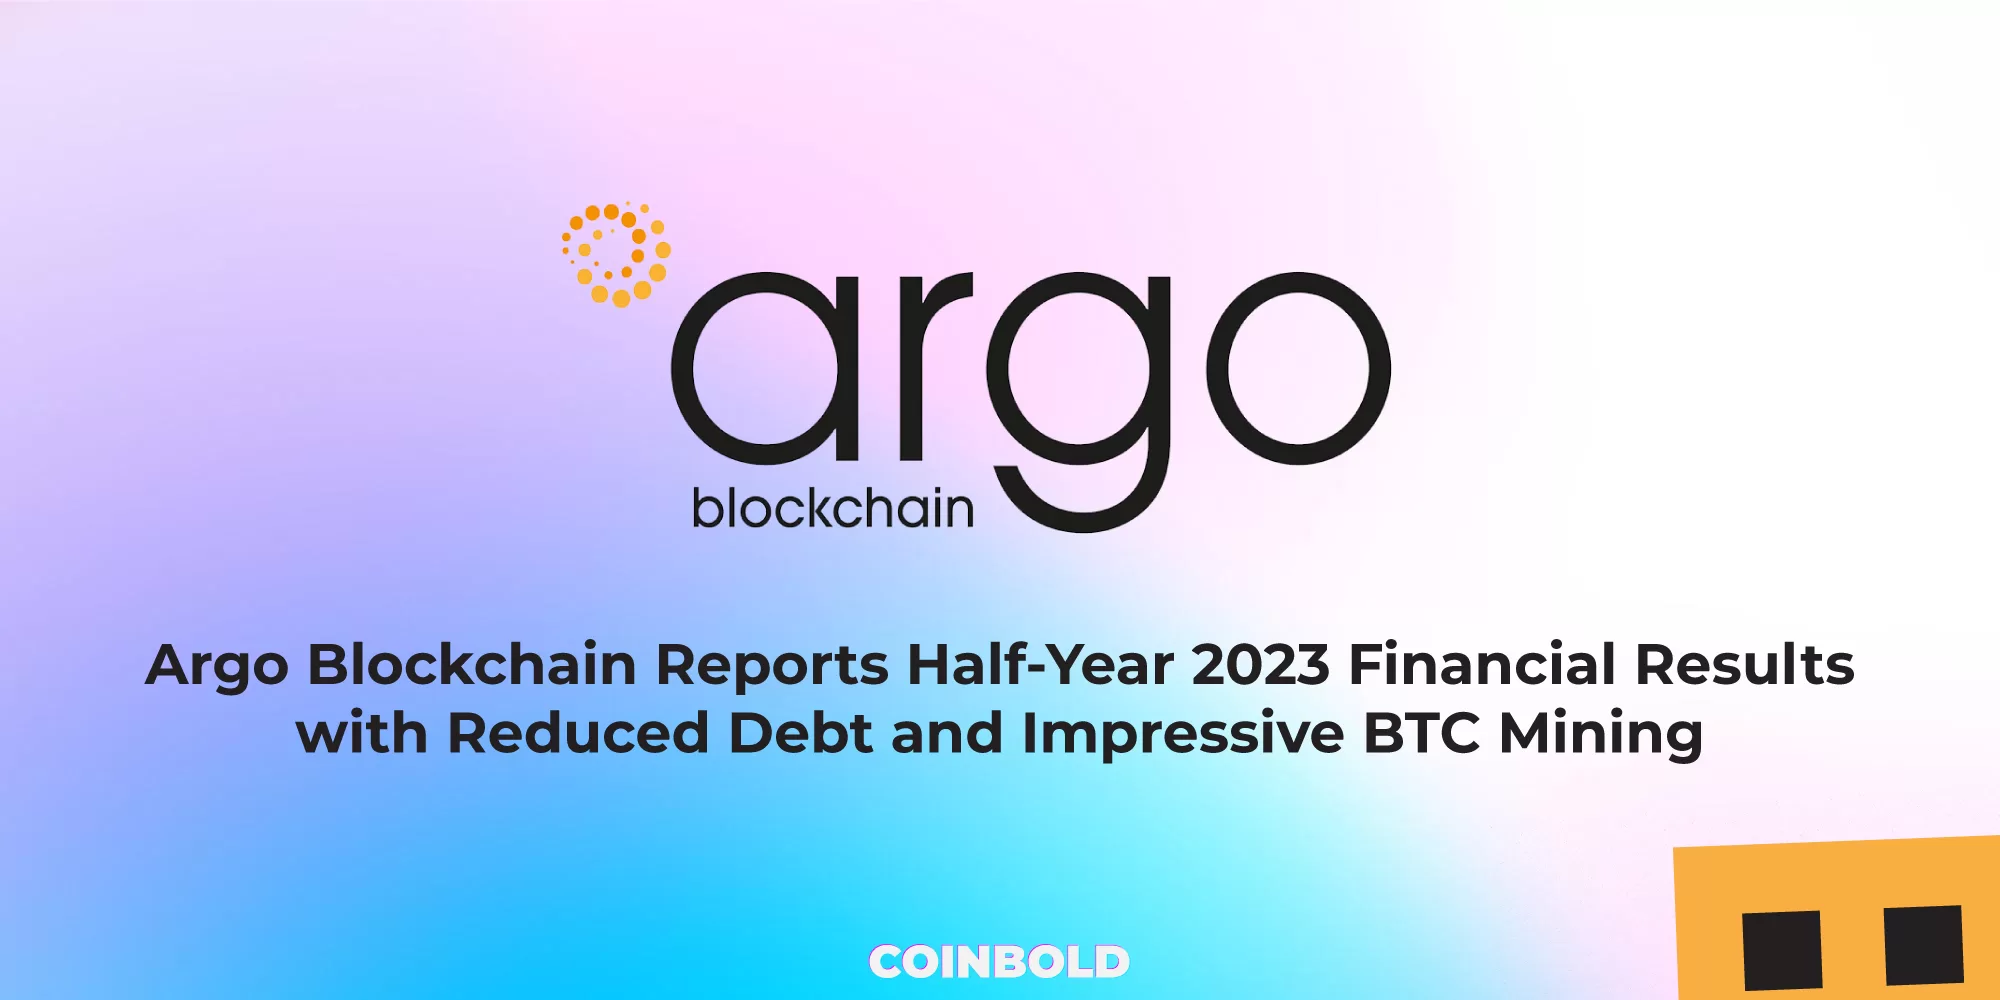 Argo Blockchain Reports Half Year 2023 Financial Results with Reduced Debt and Impressive BTC Mining